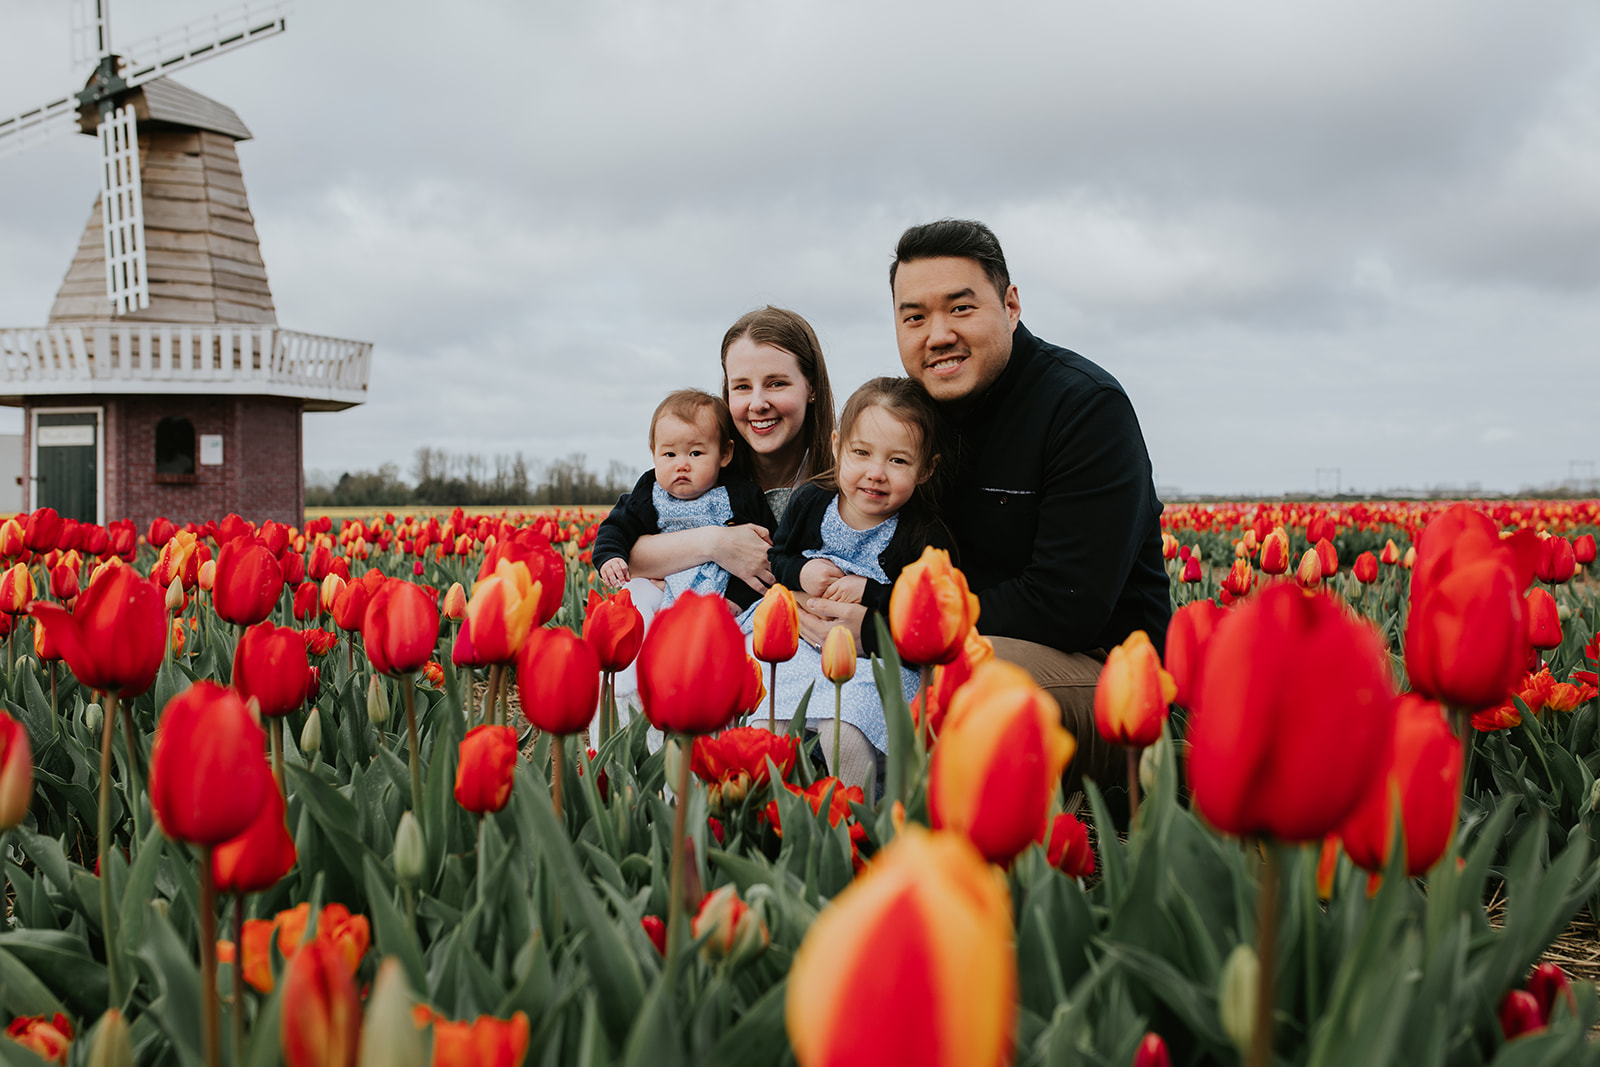 Family photoshoots at the tulip fields 